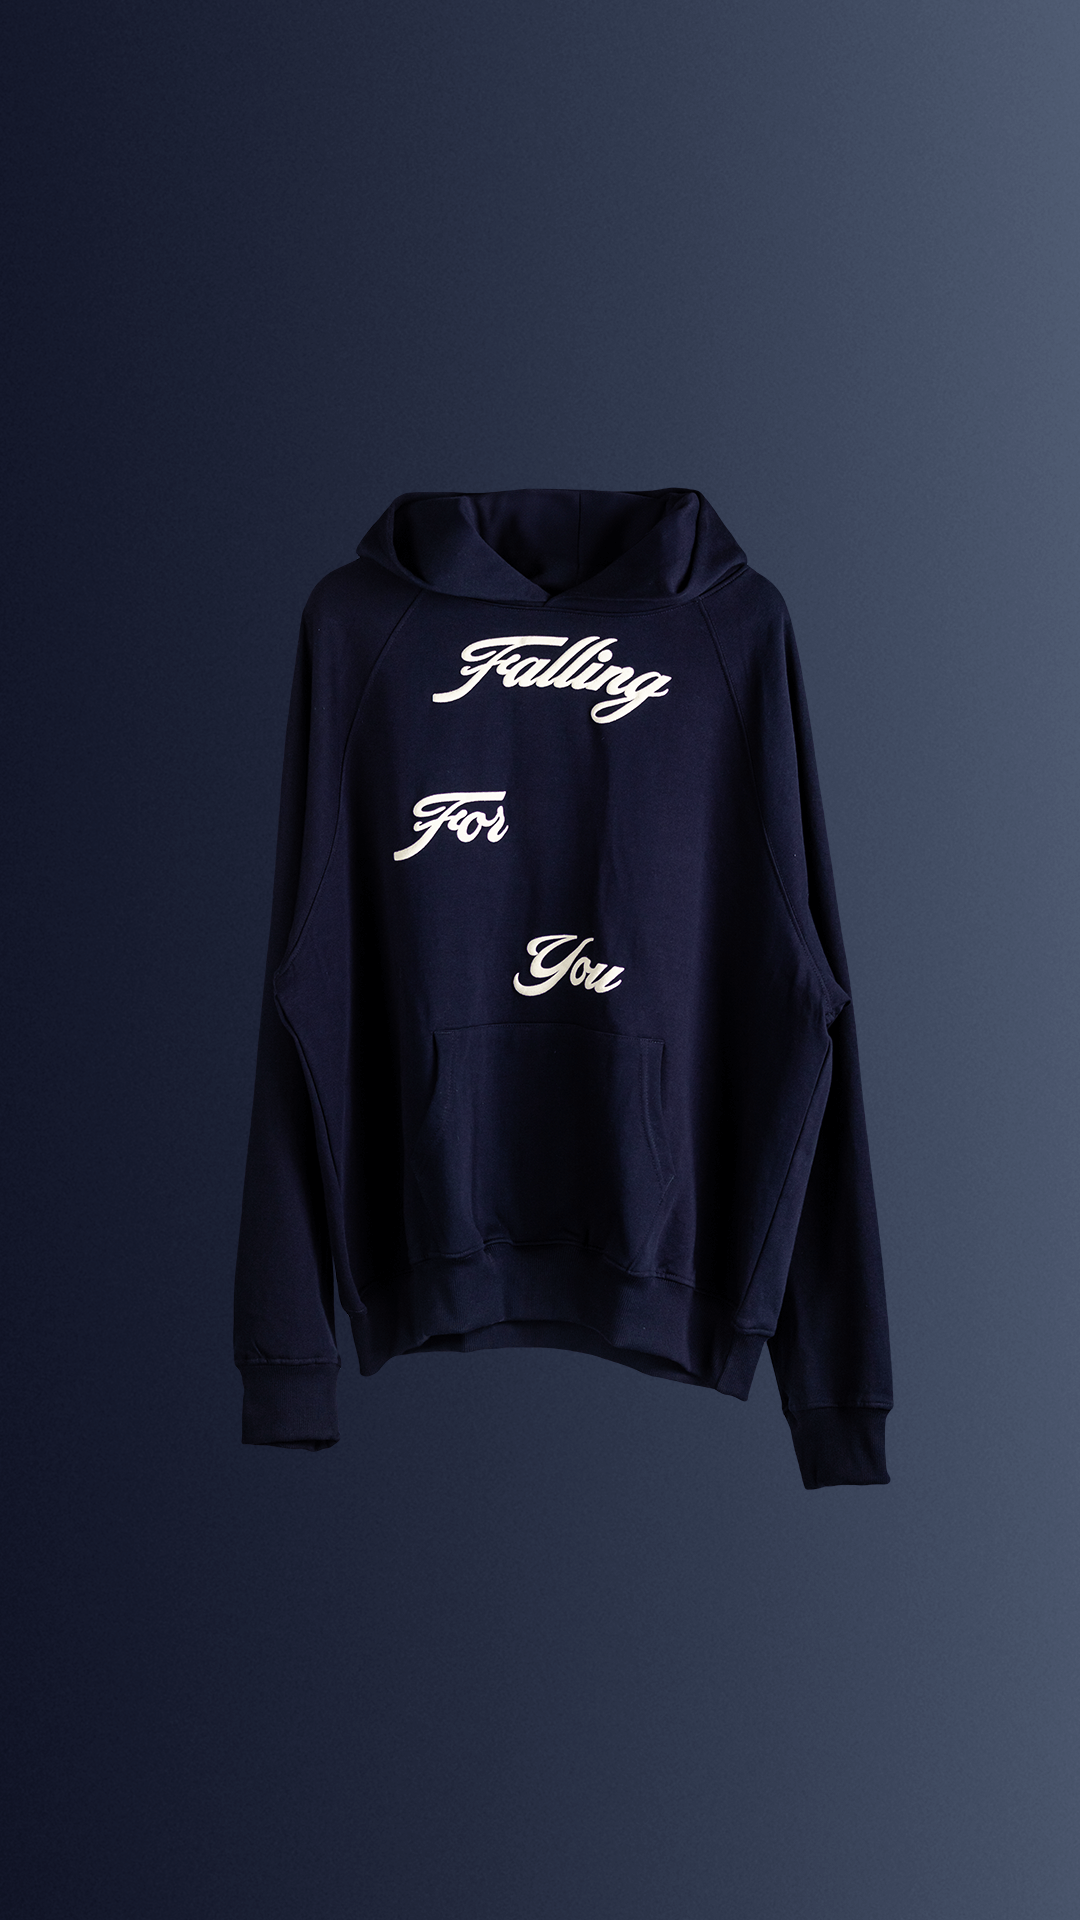 FALLING FOR YOU NAVY BLUE HOODIE 12 1